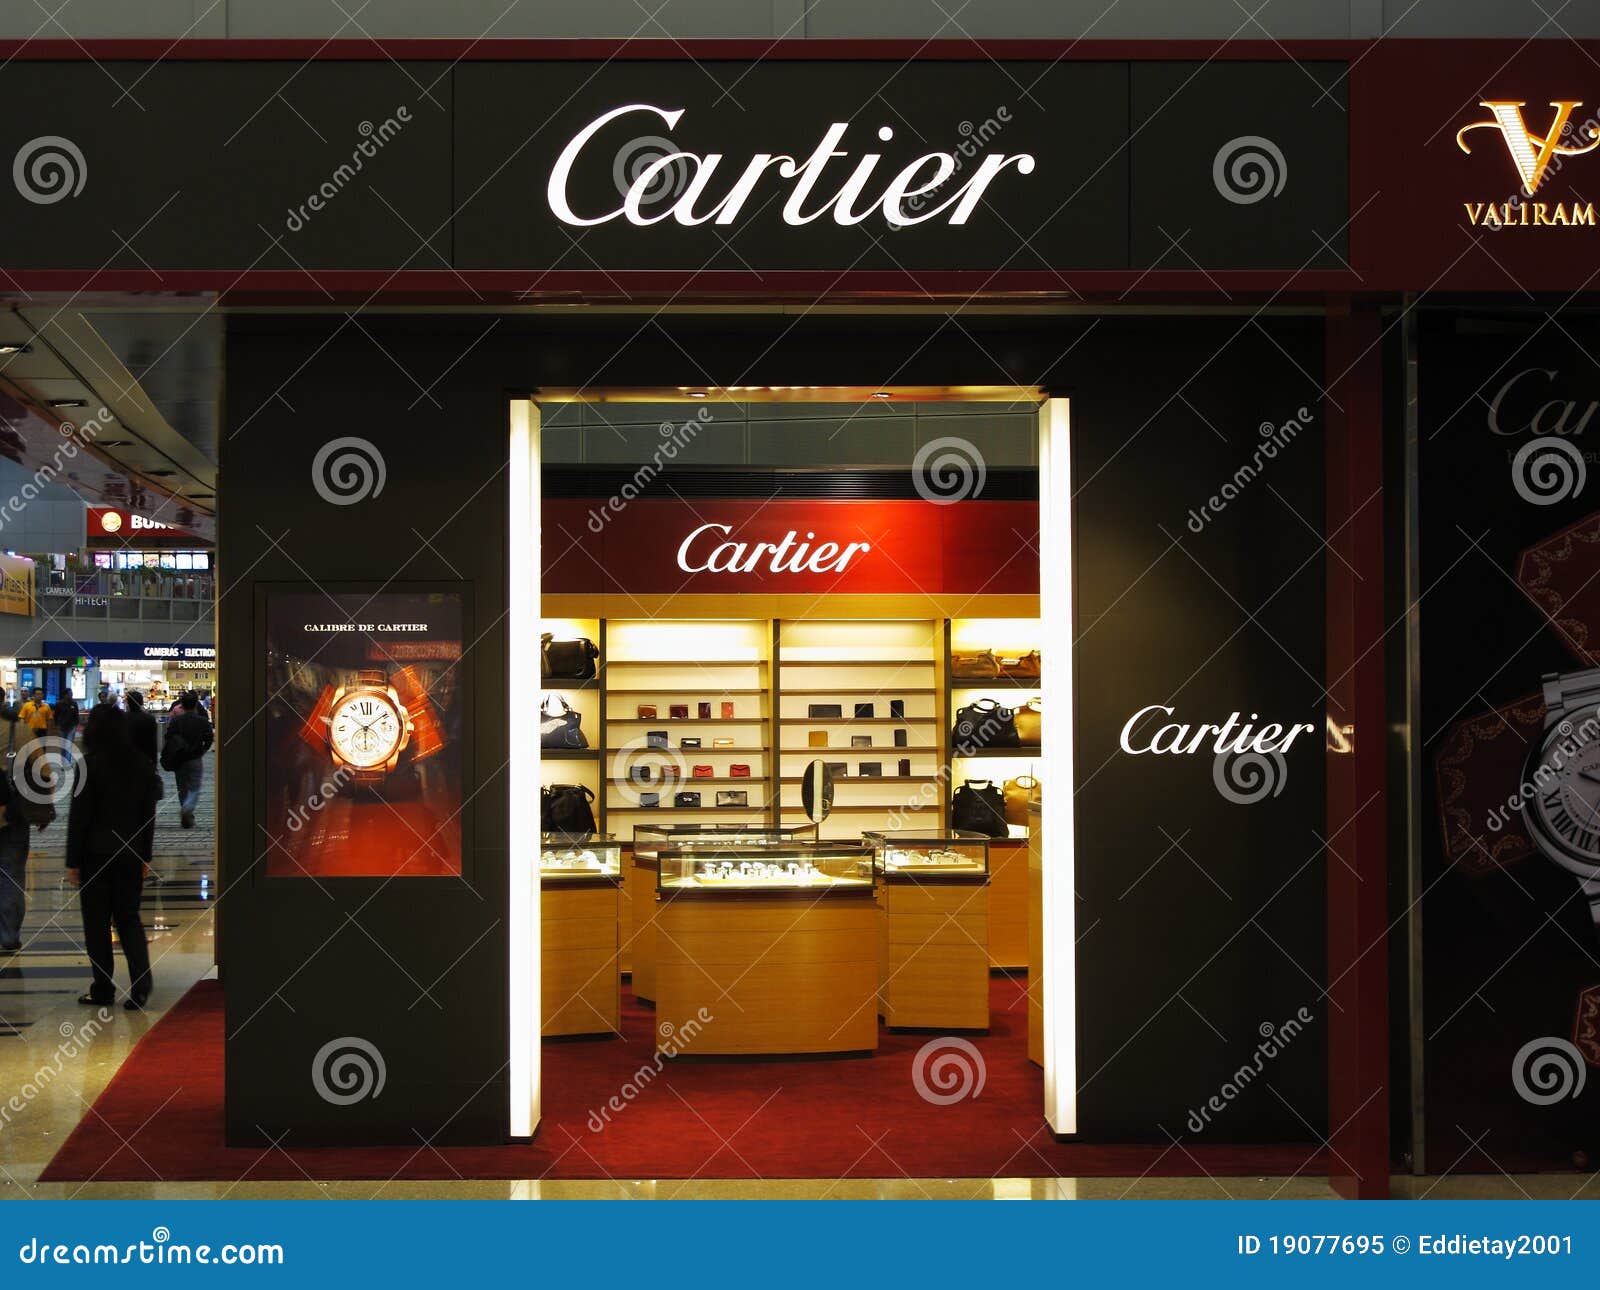 cartier airport prices